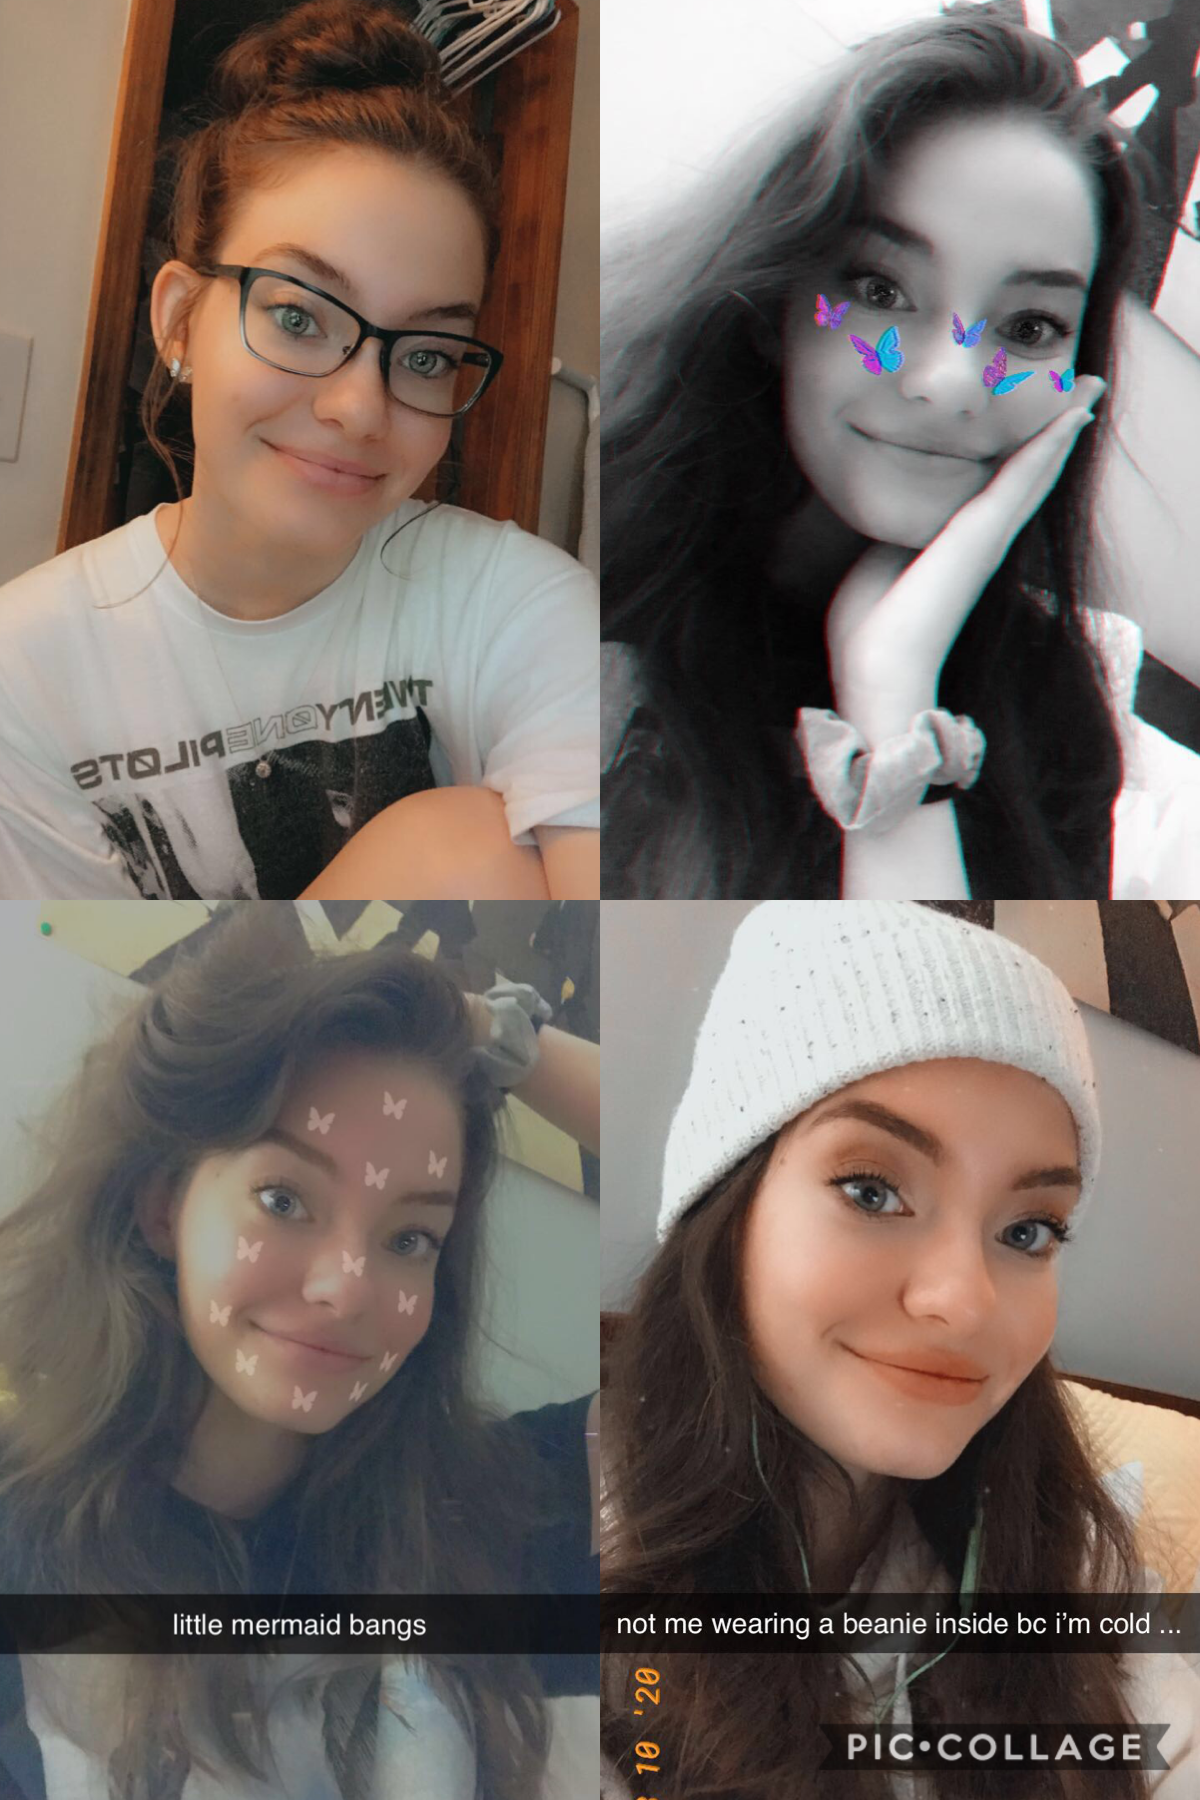 hi! here’s a collection of recent selfies bc i’ve been feeling more pretty recently! also these literally all look the same ahahah 😂😂 just wanted to share to boost my confidence thank you and good day ✨✨✨